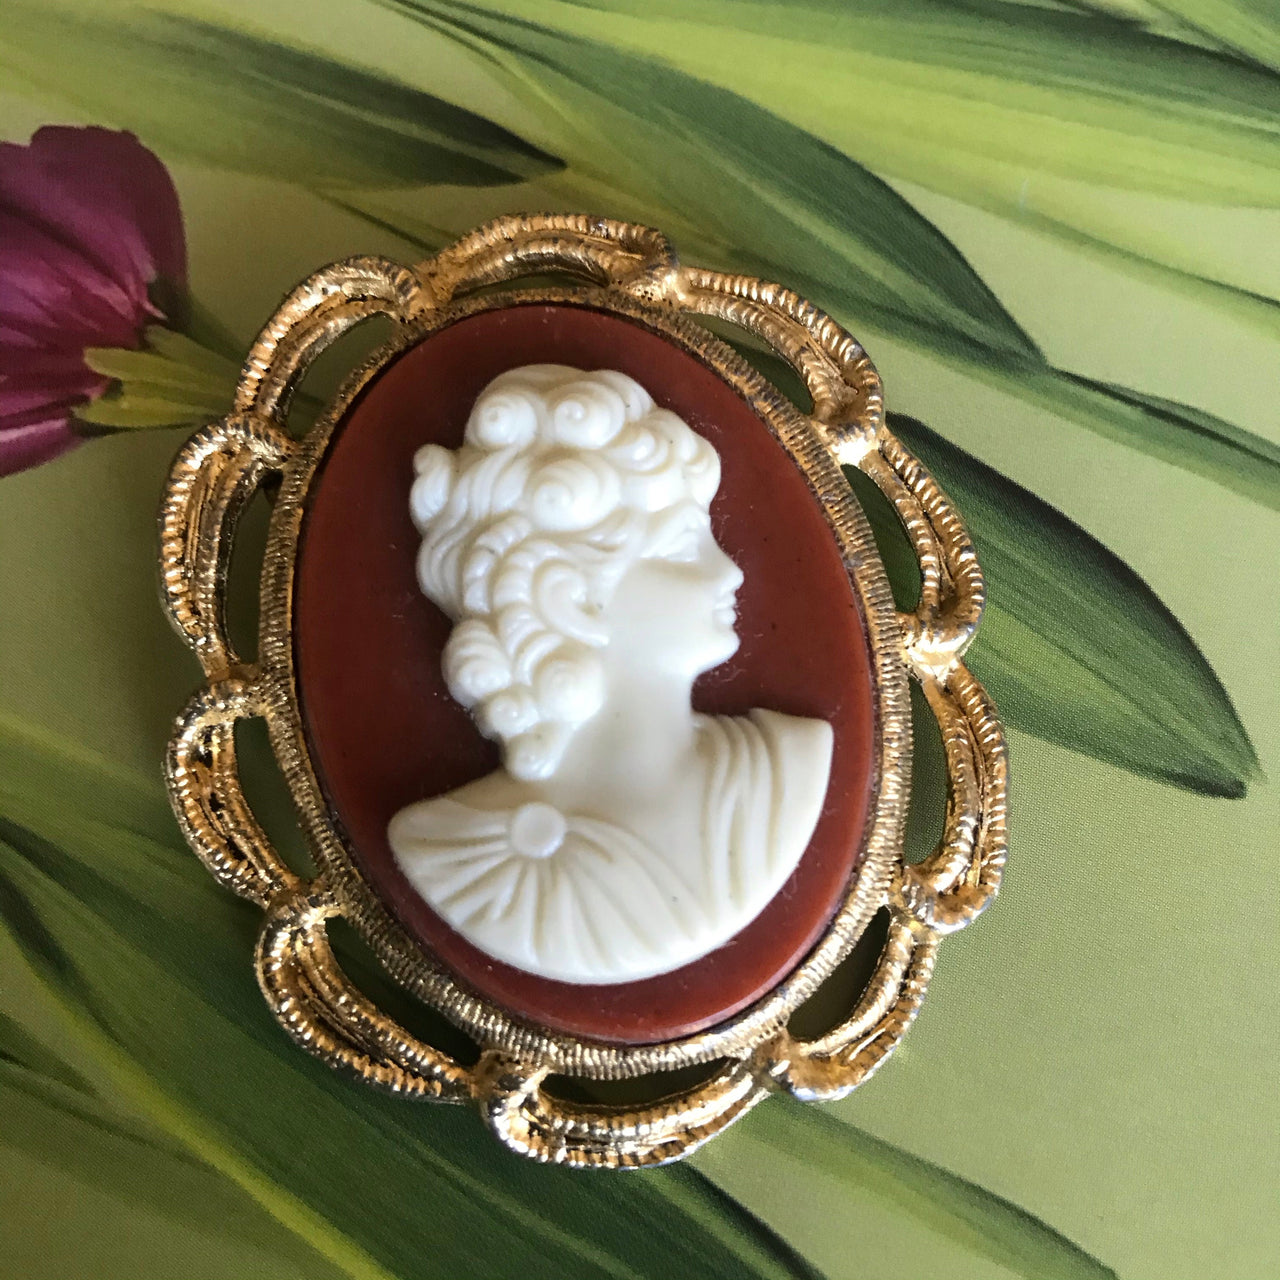 Gold Cameo Brooch Jewelry Bloomers and Frocks 